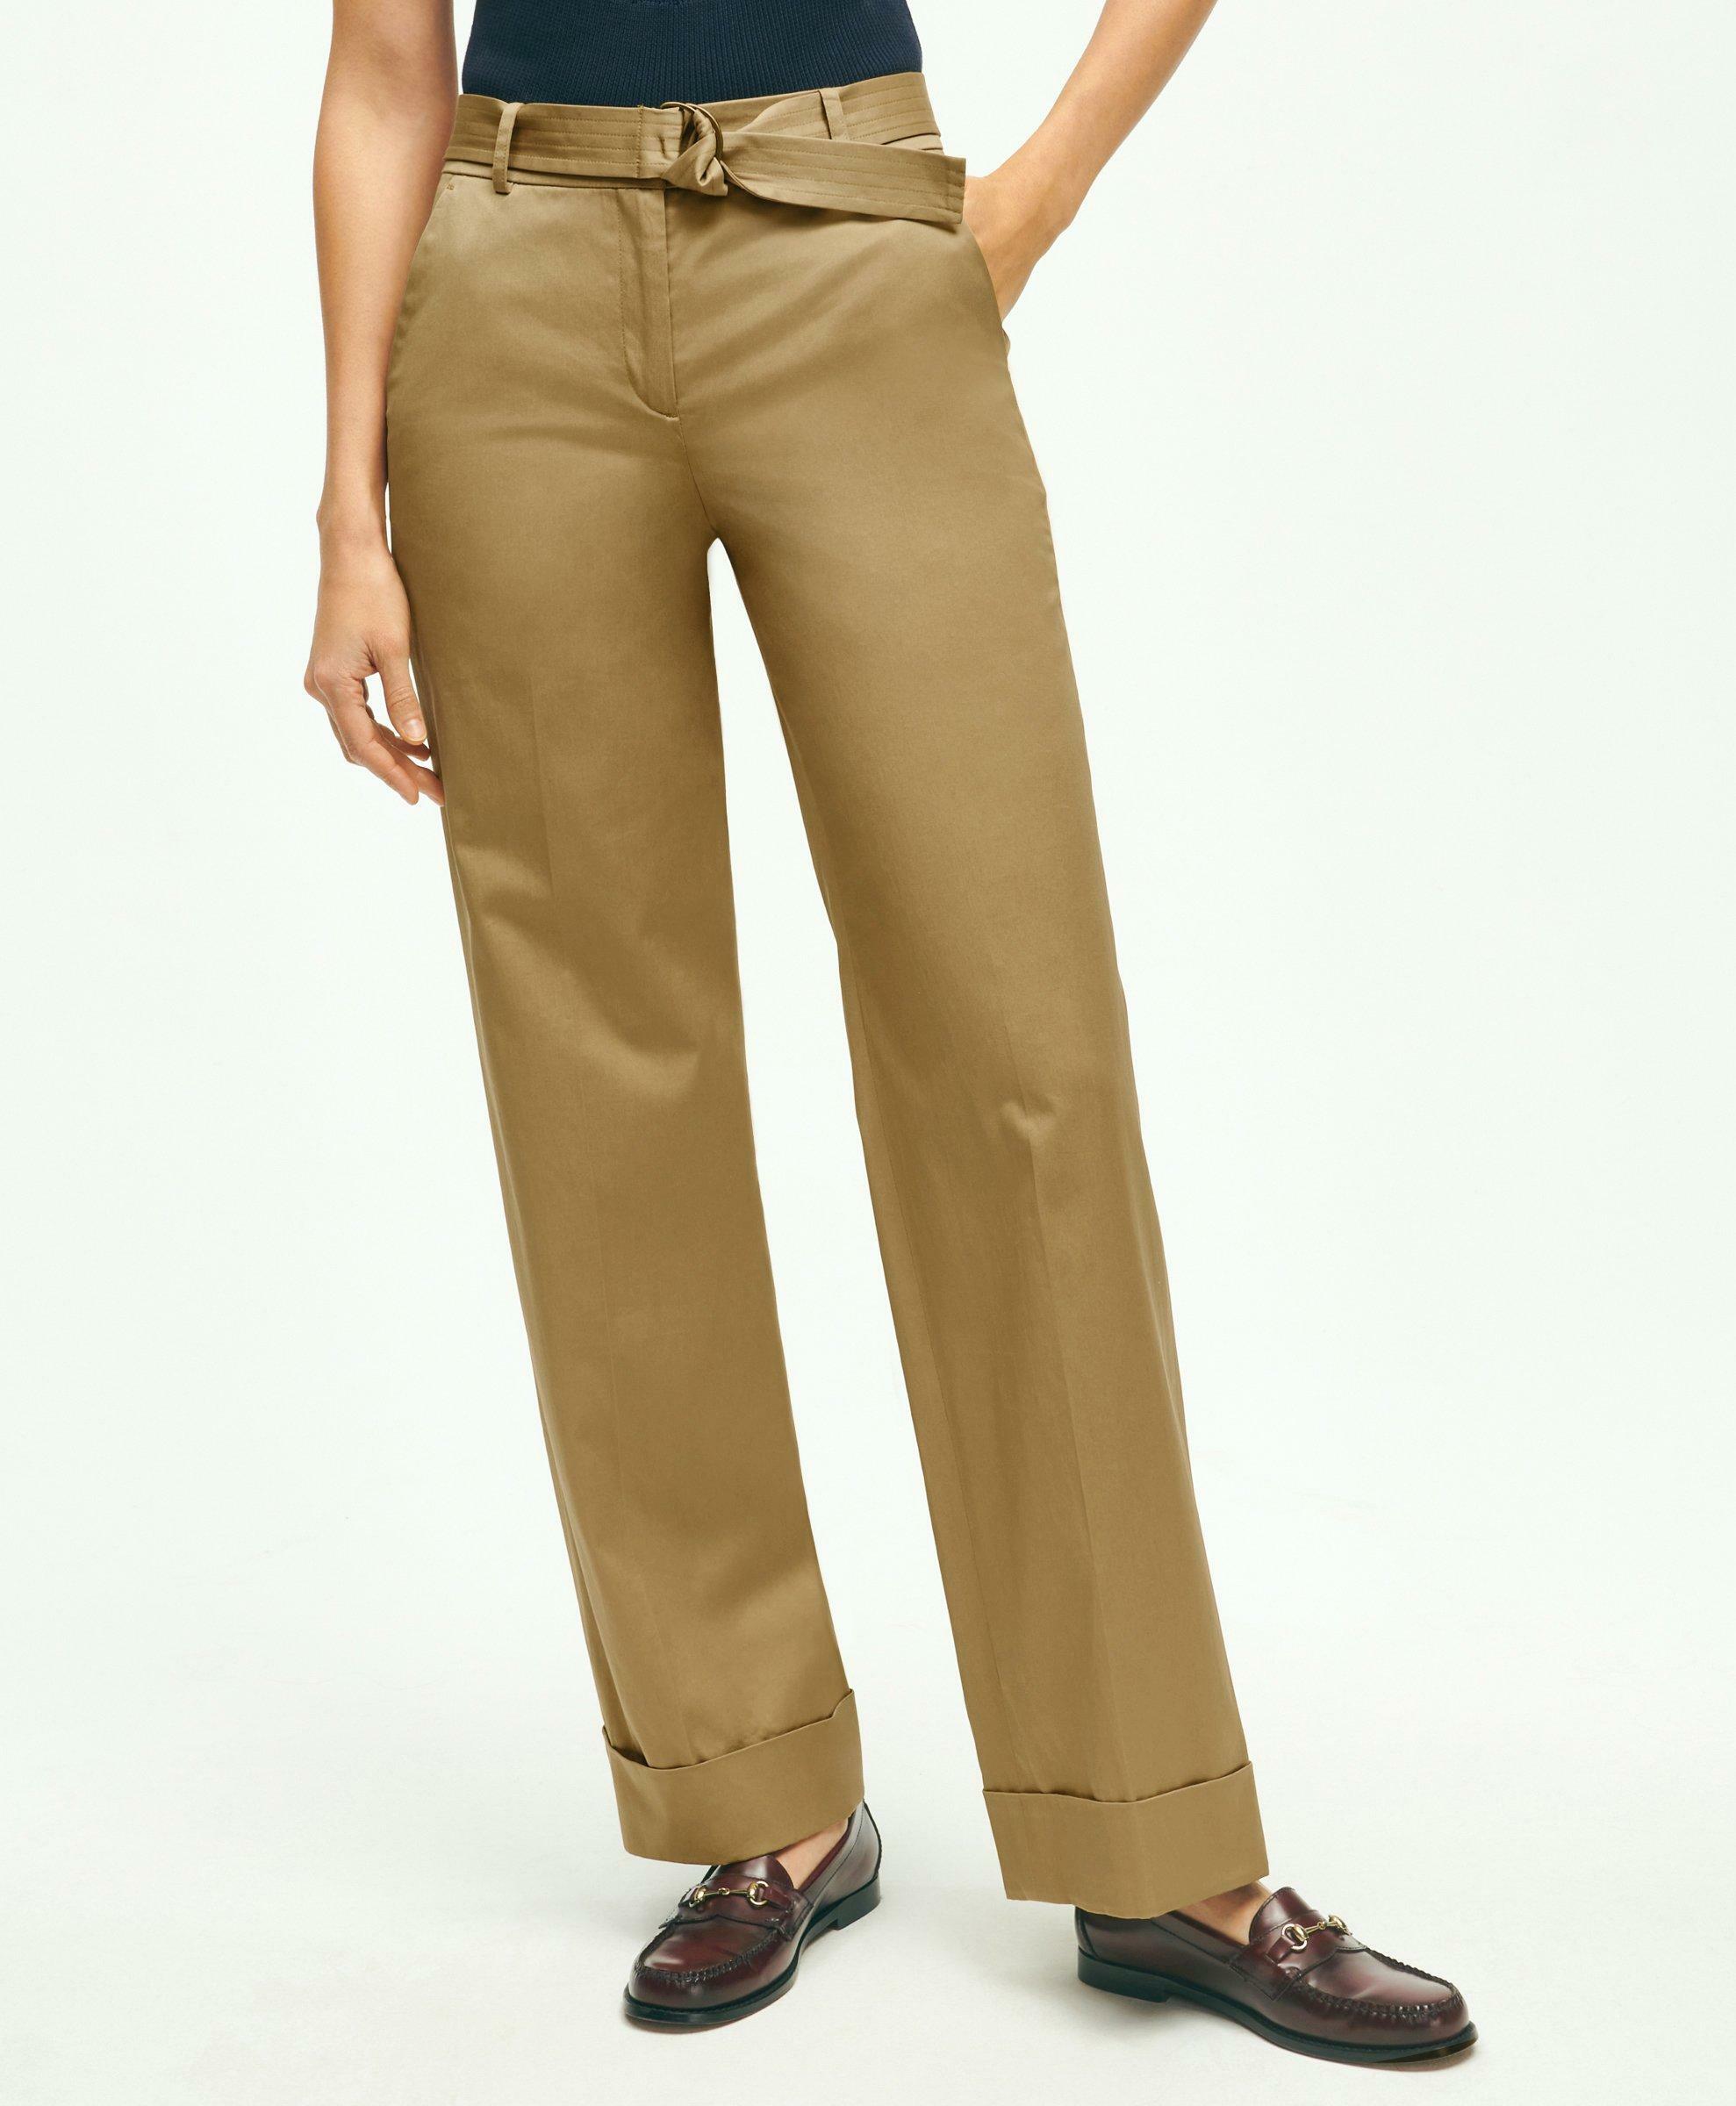 Brooks Brothers Women's Stretch Cotton Twill Belted Pants | Khaki